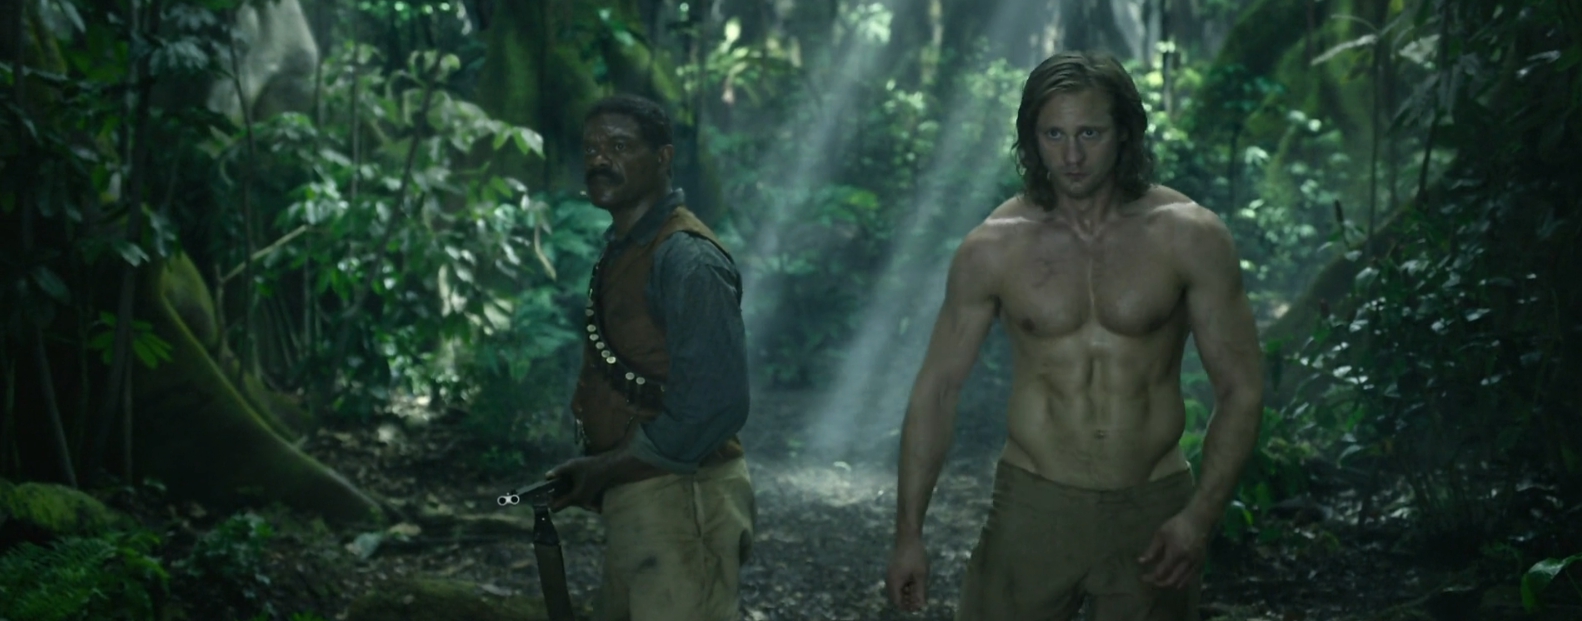 The Legend of Tarzan review – noble intentions can't rescue ropey rehash, Action and adventure films